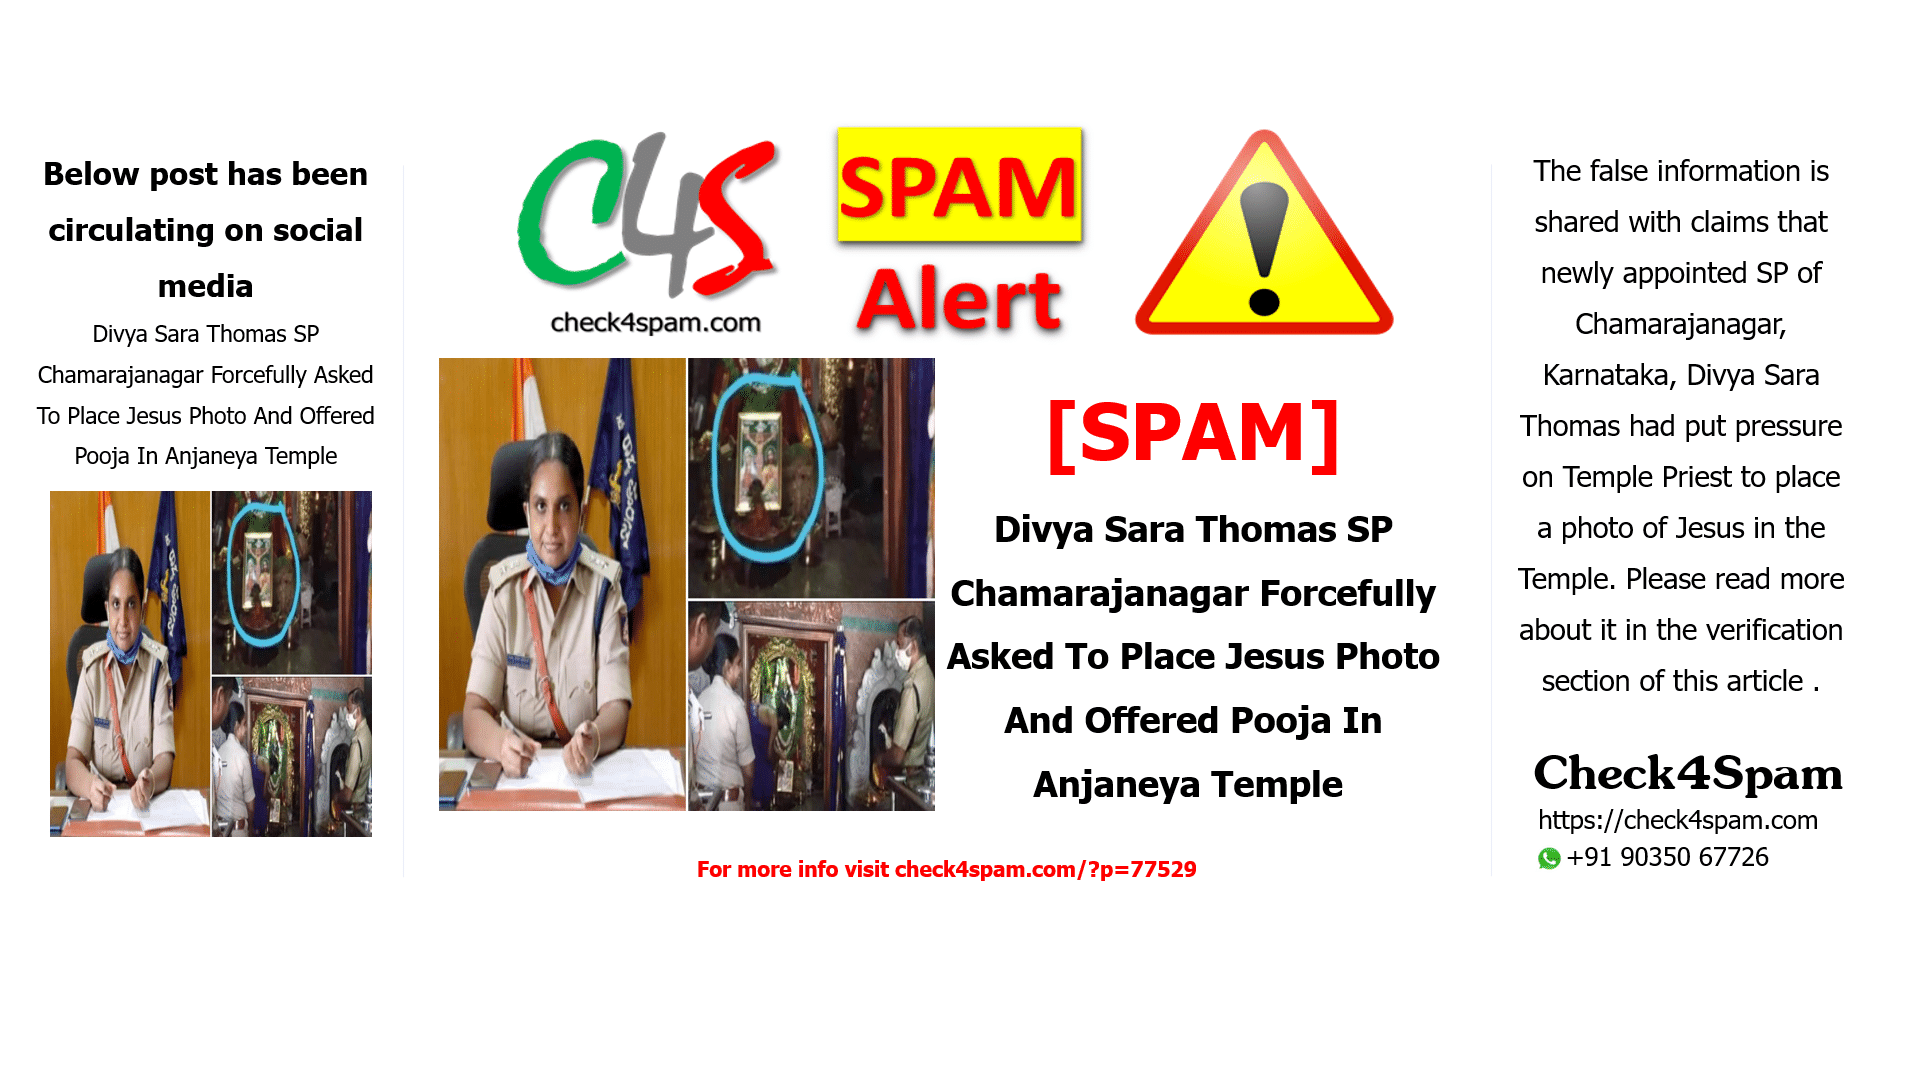 Divya Sara Thomas SP Chamarajanagar Forcefully Asked To Place Jesus Photo And Offered Pooja In Anjaneya Temple